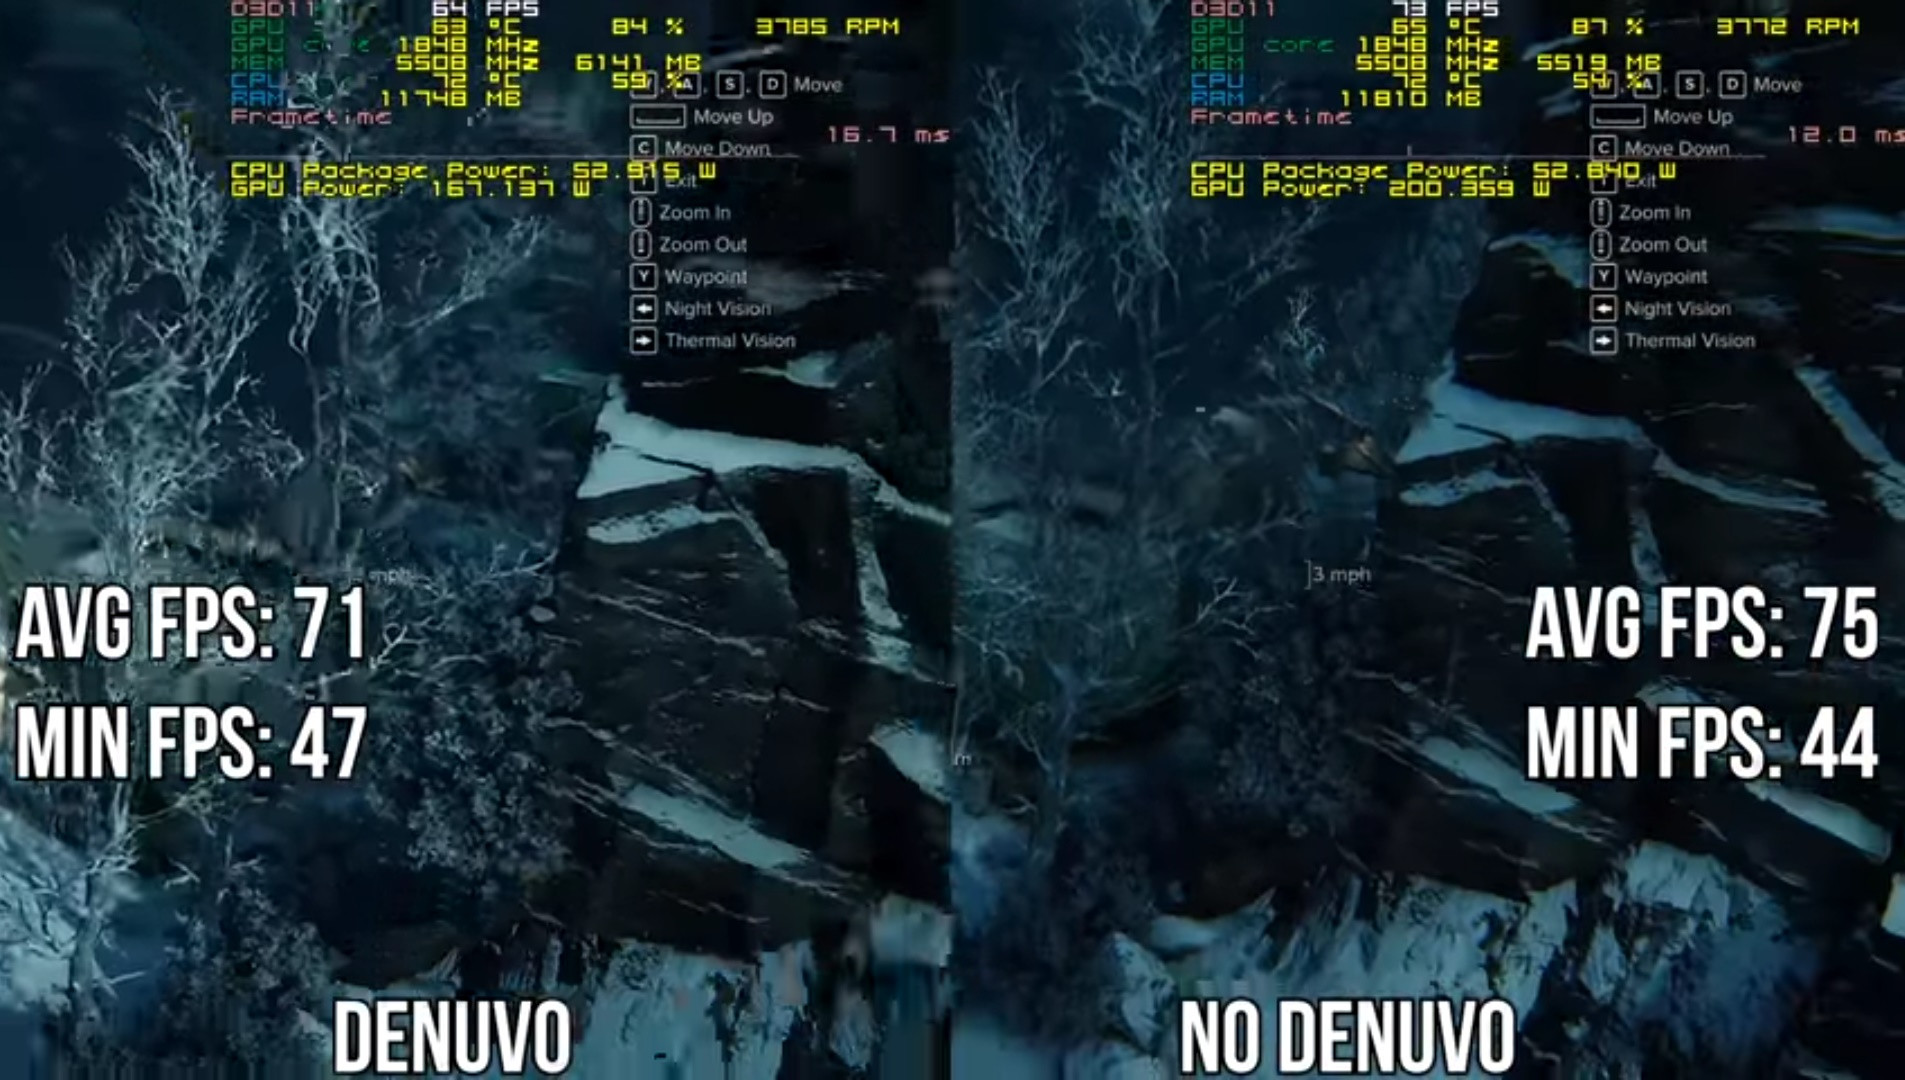 Denuvo S Impact On Game Performance Benchmarked Techpowerup